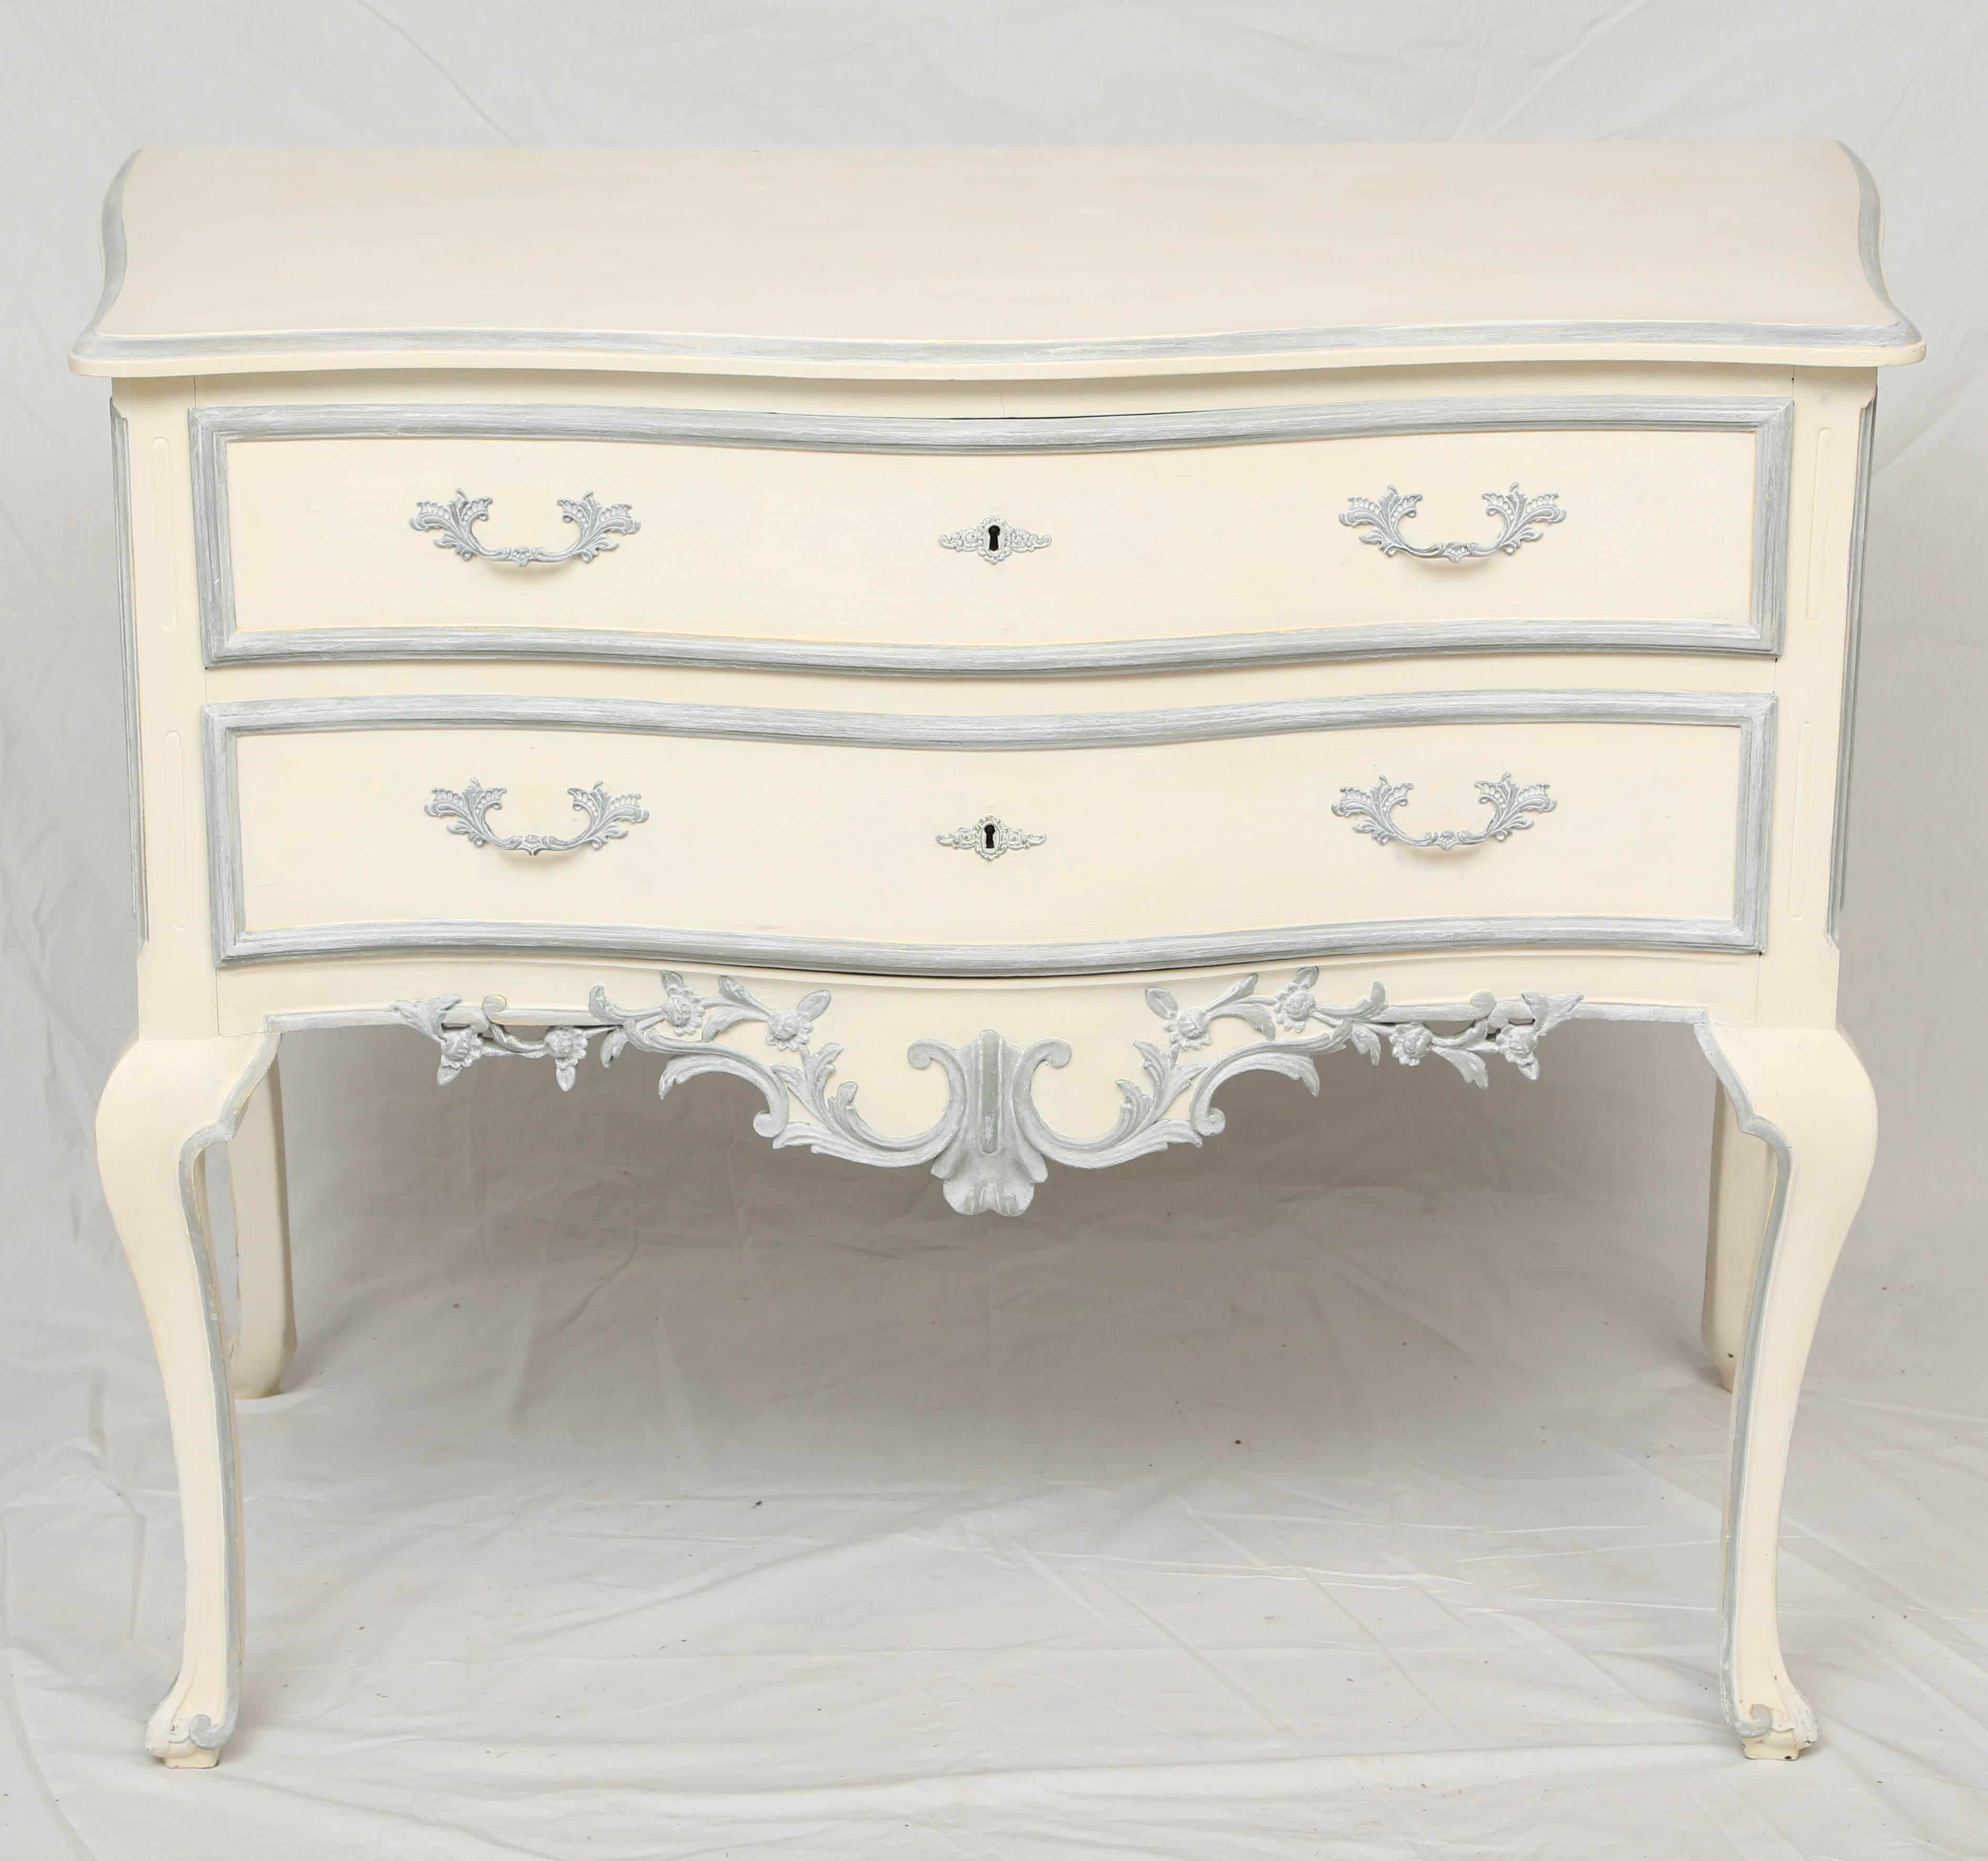 Pair of commodes, having a painted finish, each with a shaped, molded top, over conforming base, double stacked, raised and fielded drawers, serpentine apron decorated with foliate carving, raised on cabriole legs, ending in scroll toes.

Stock ID: